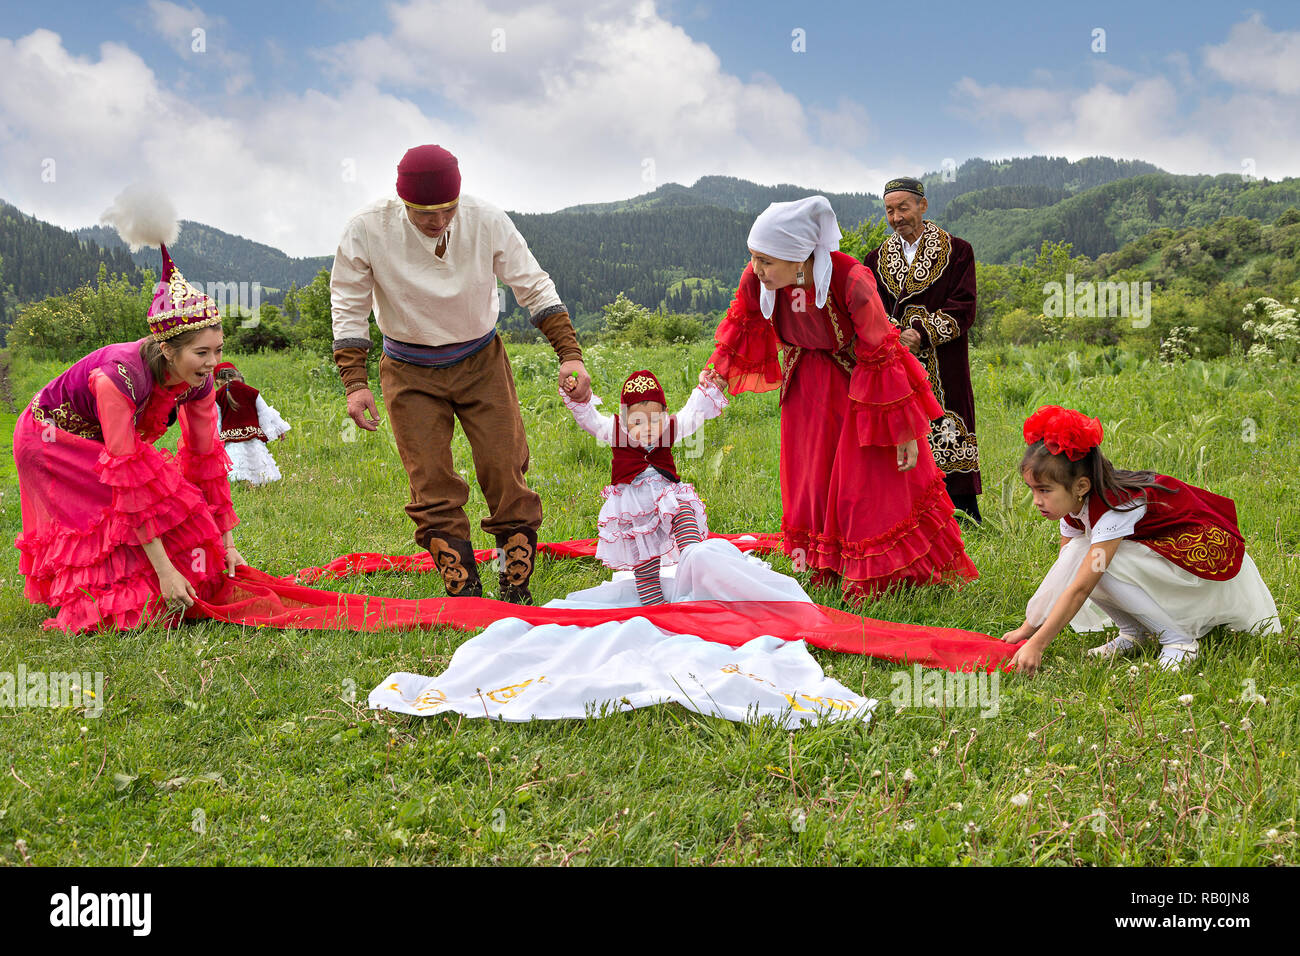 Kazakh people showing local tradition of Tusau Kesu which symbolizes a ceremony that accompanies first steps of a child, Kazakhstan Stock Photo